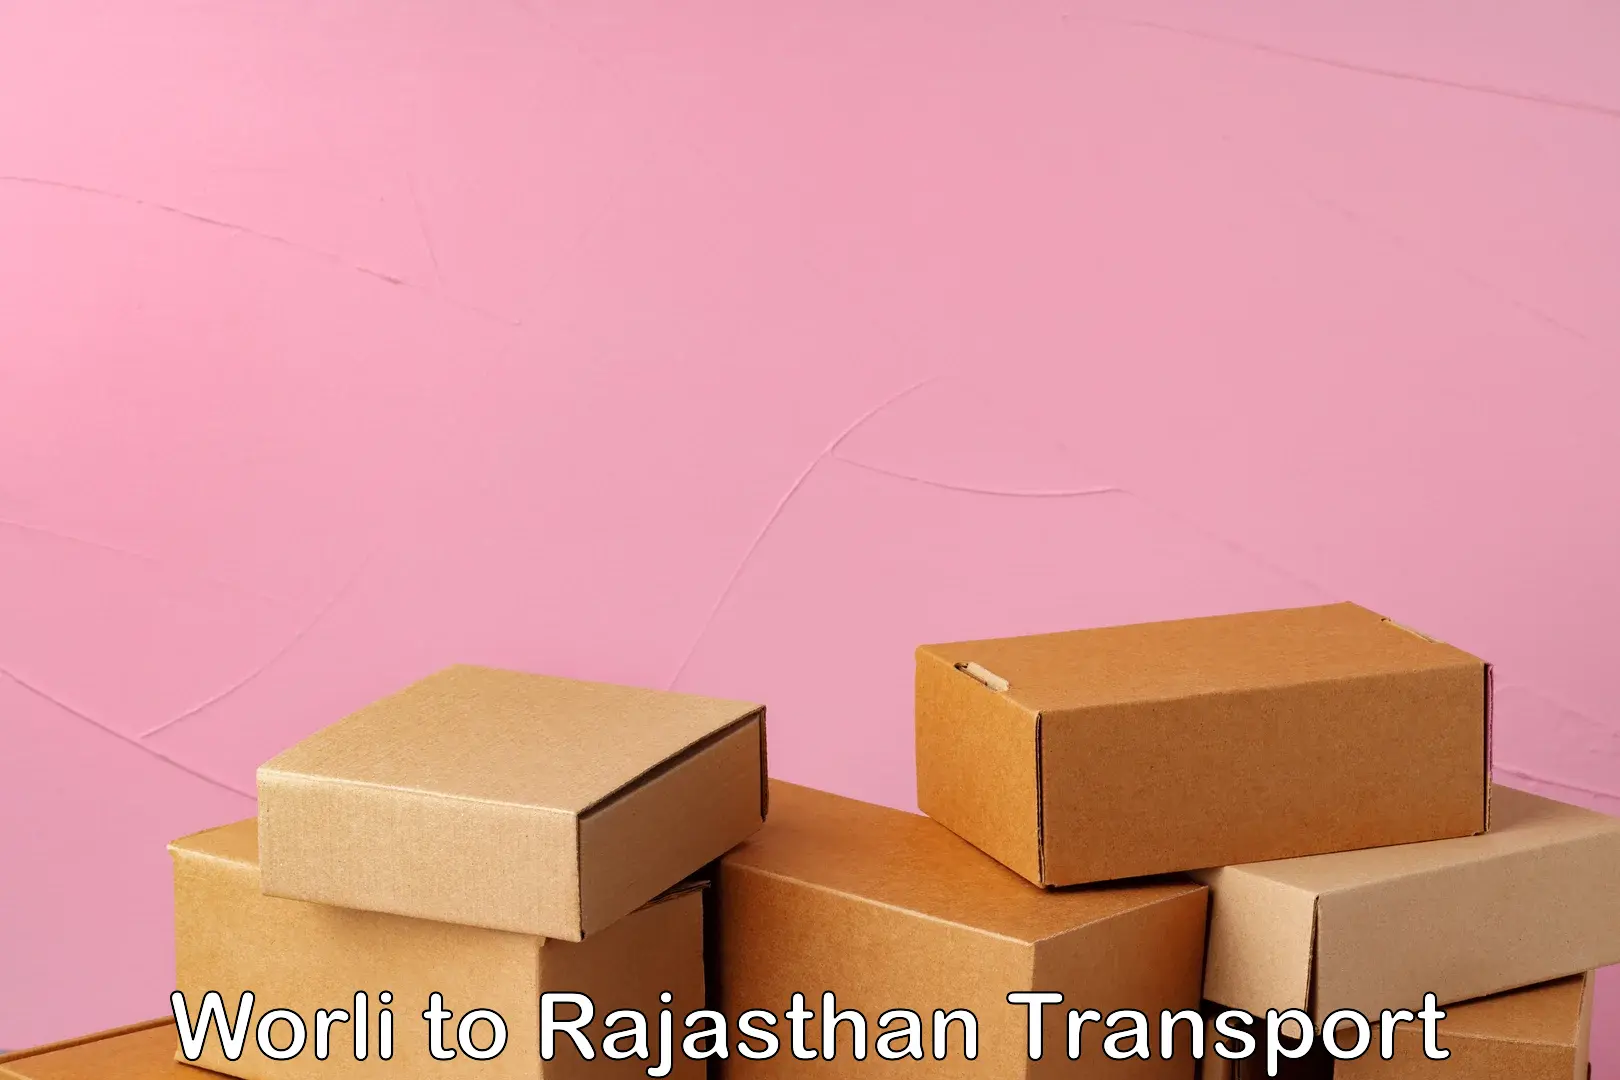 Truck transport companies in India Worli to Rajasthan